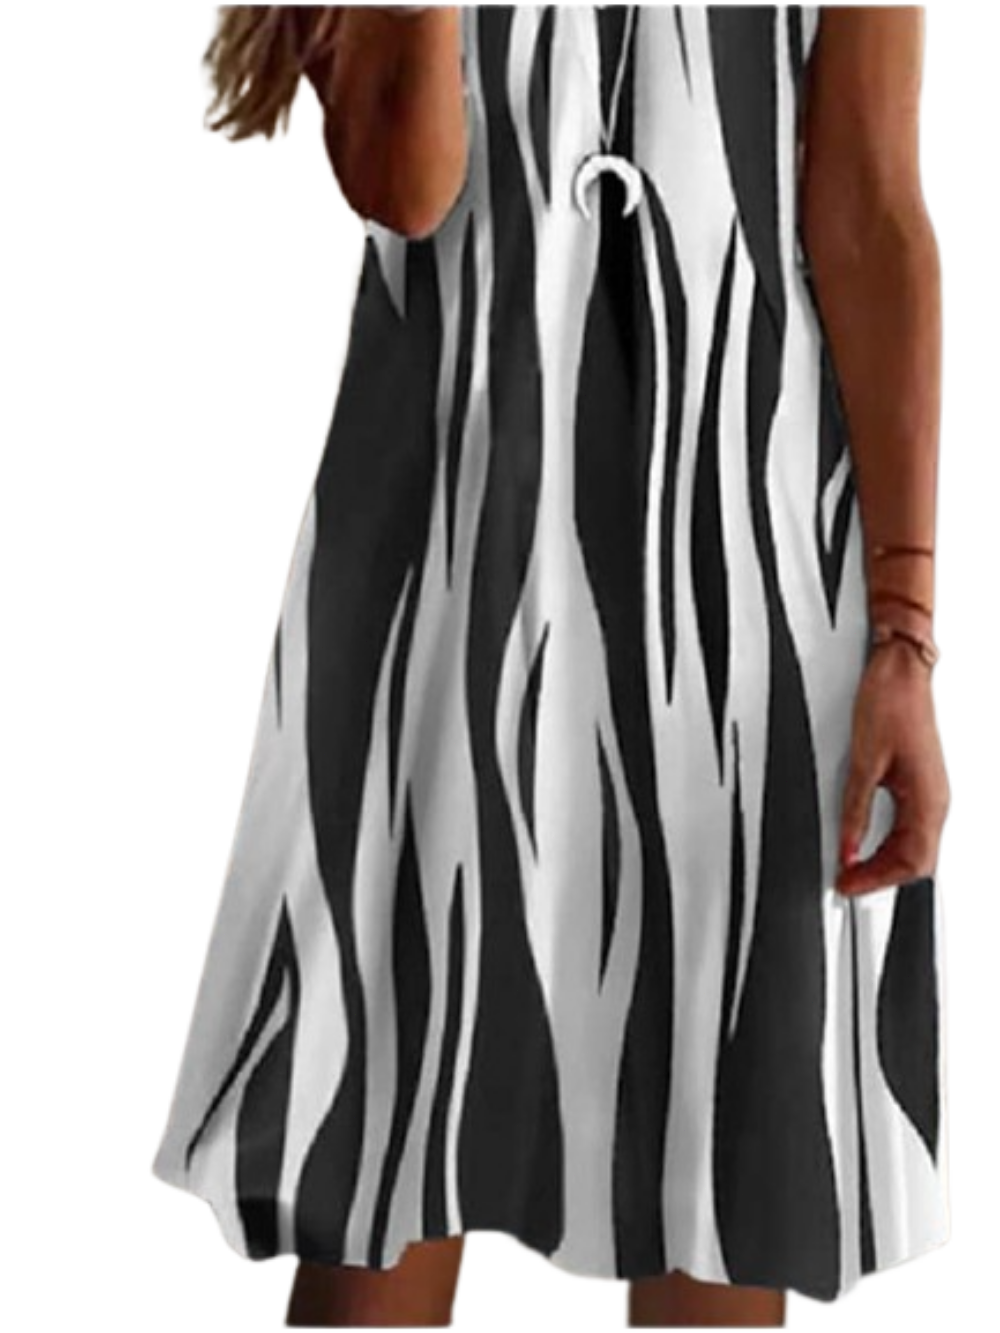 Fashionable Sleeveless Striped Print V Neck Daily Date Dress For Womens